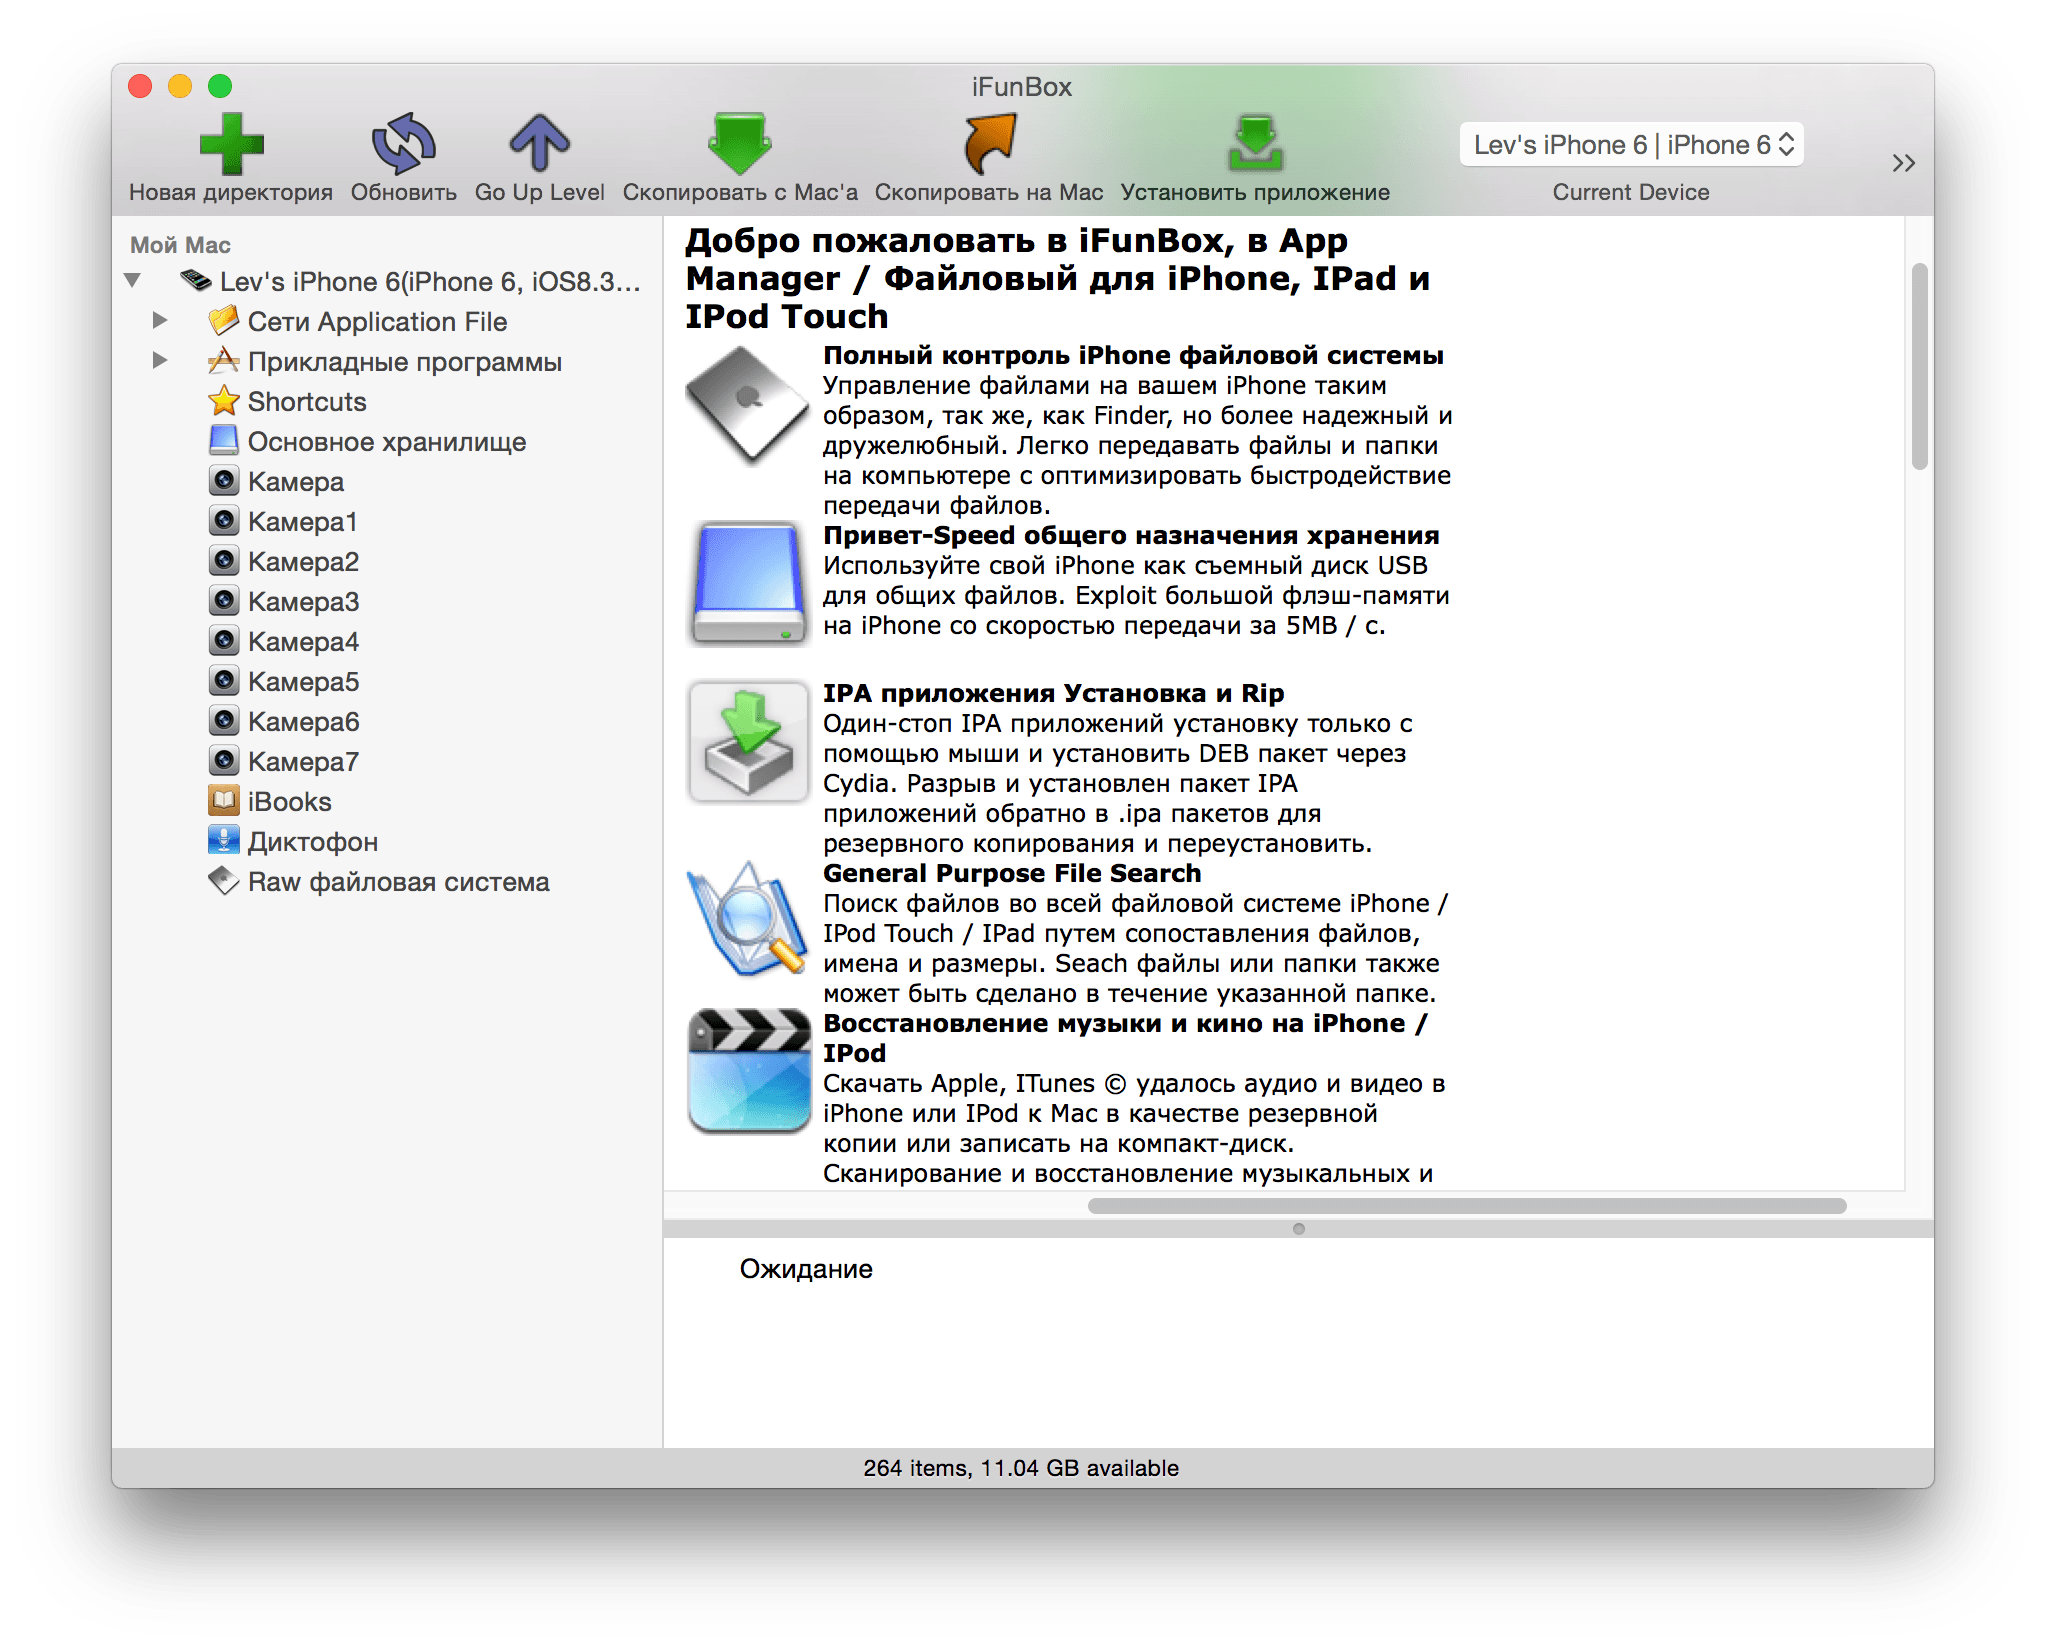 ifunbox for mac 10.6.8